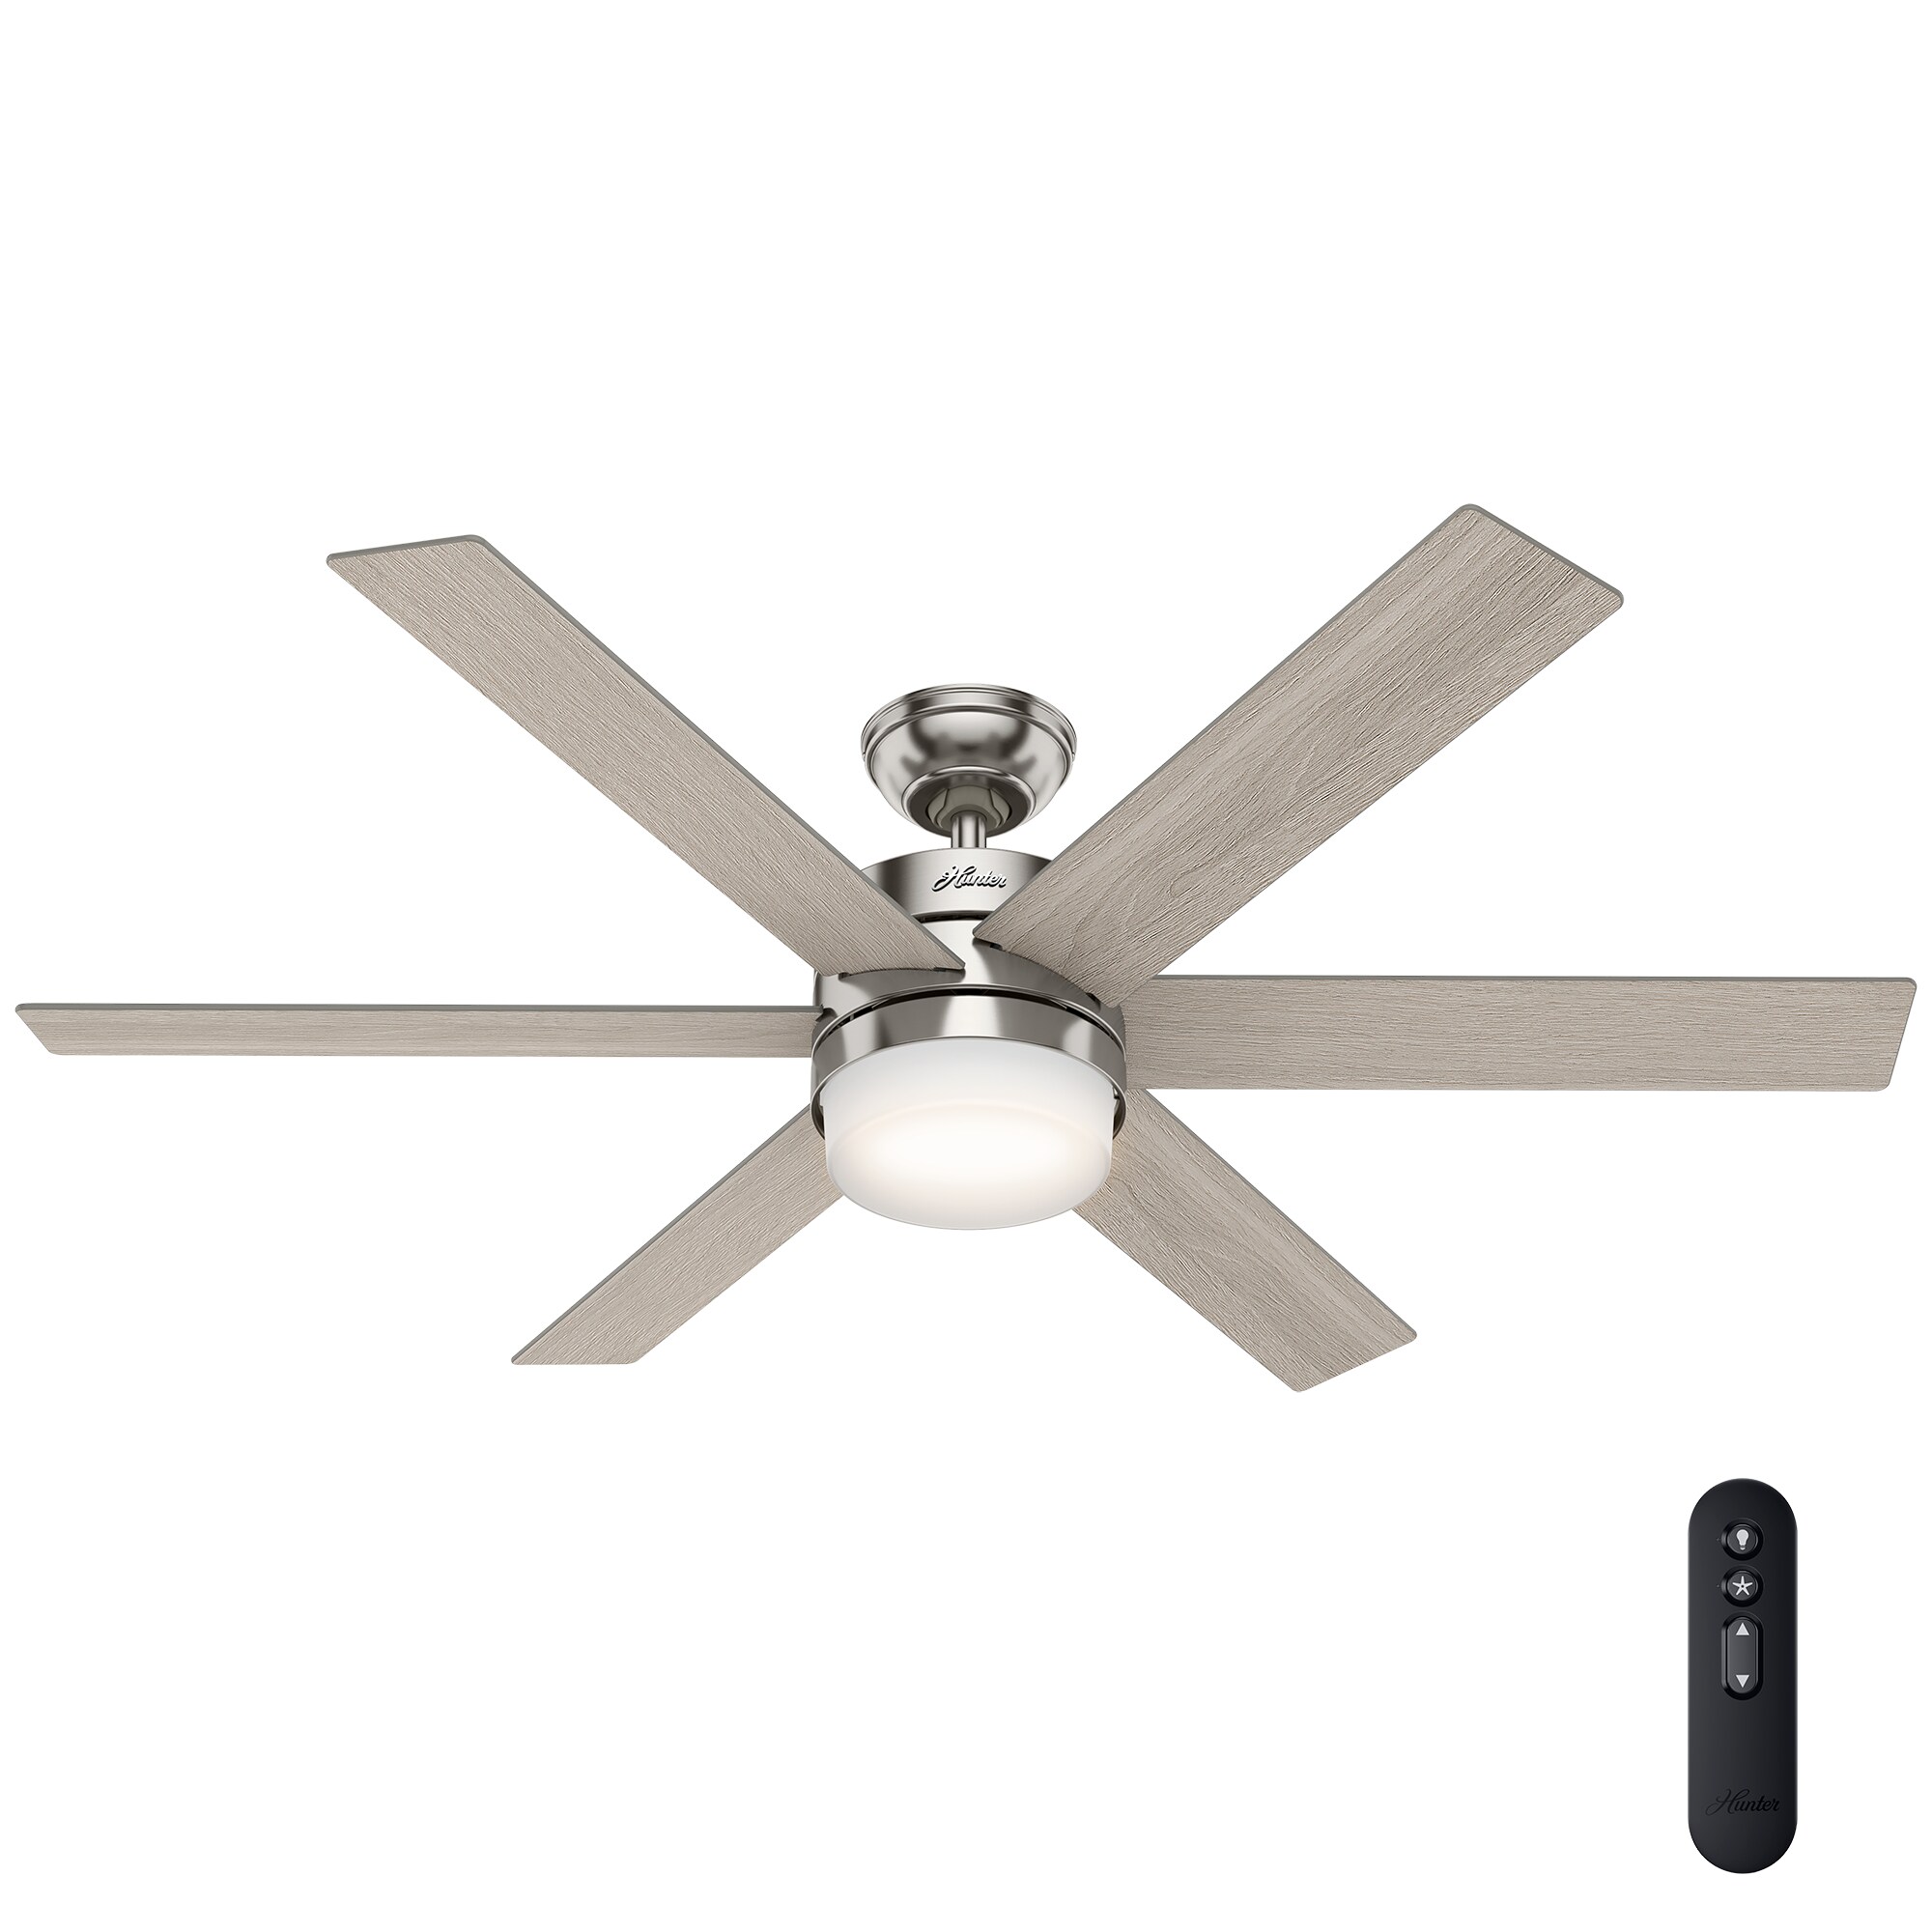 Contemporary Hunter 54" LED Ceiling Fan with Light Kit in Brushed Nickel 